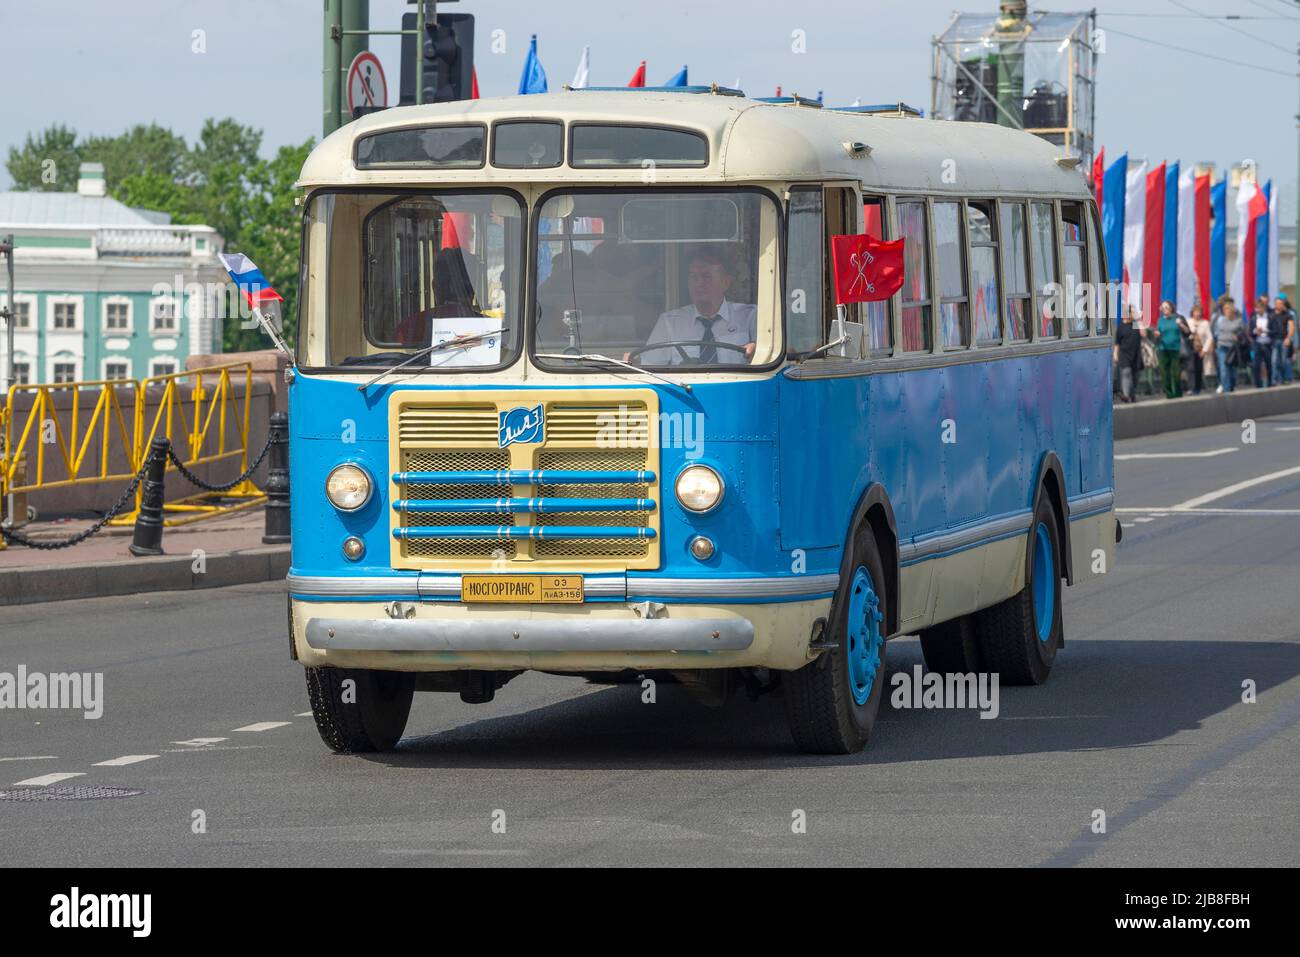 SAINT PETERSBURG, RUSSIA - MAY 25, 2019: Soviet bus LiAZ-158 (ZIL-158). Parade of retro transport in honor of City Day Stock Photo